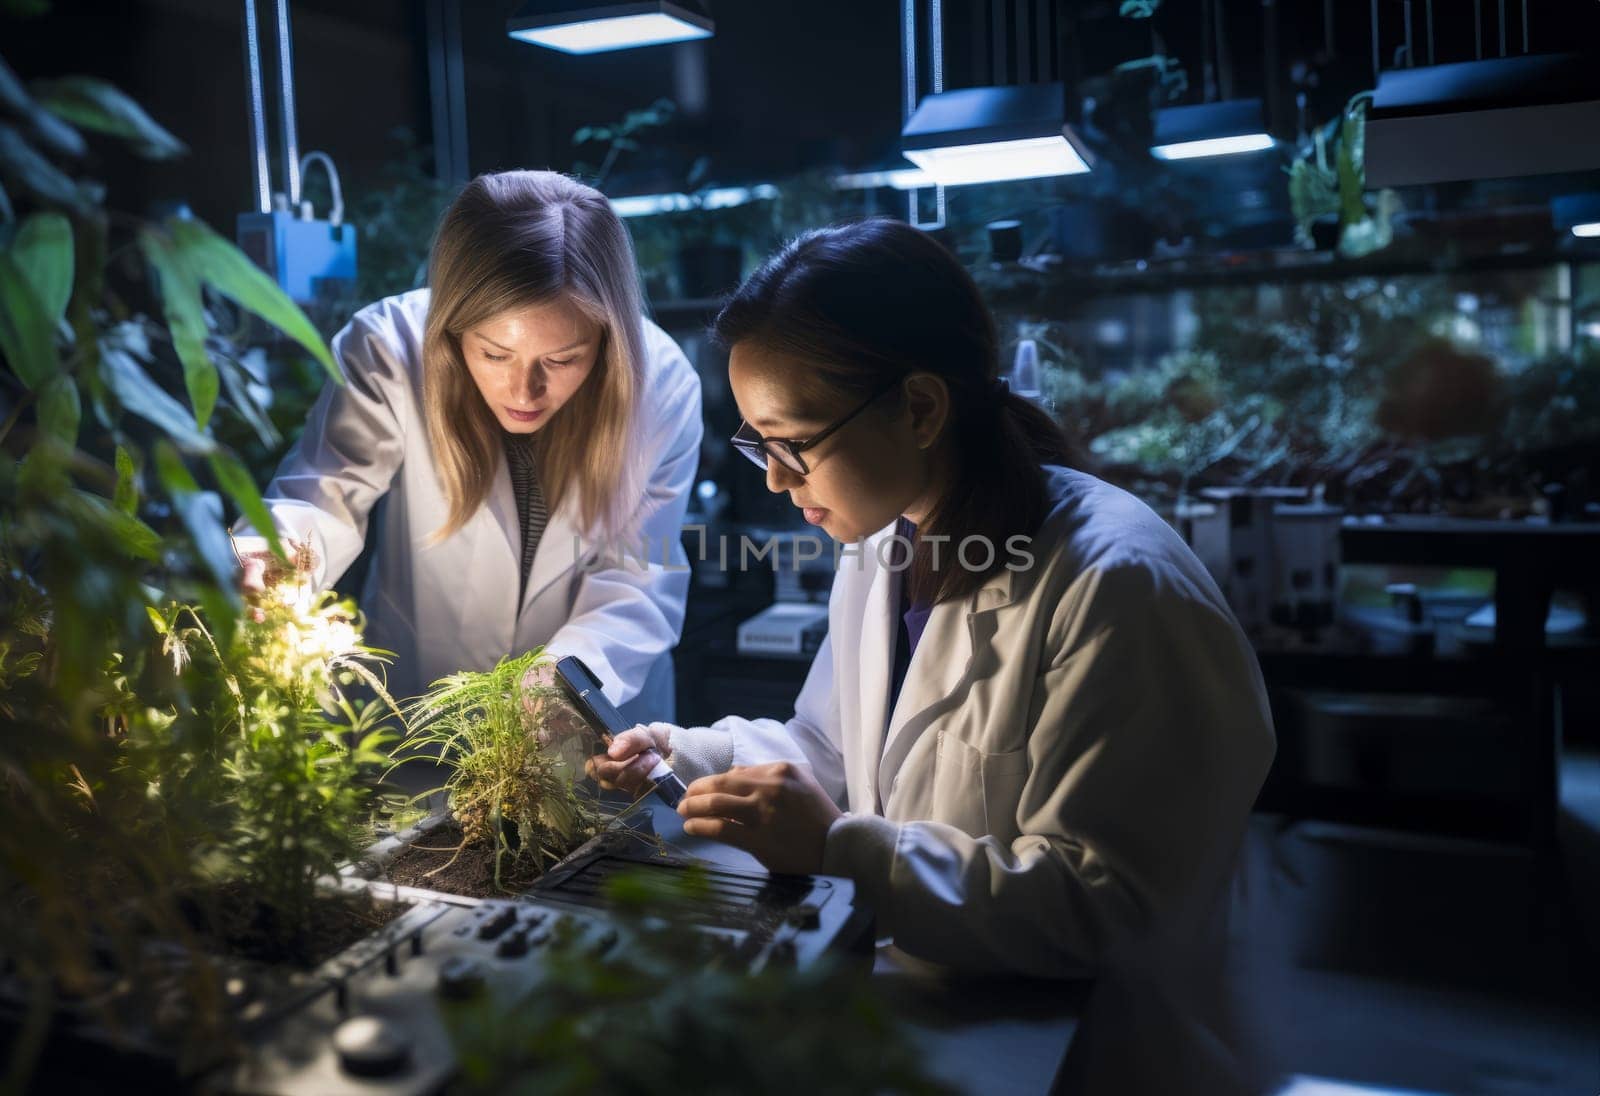 Exploring Botanical Wonders: Female Biologist Colleagues Investigate Plants in the Institute.Generated image by dotshock